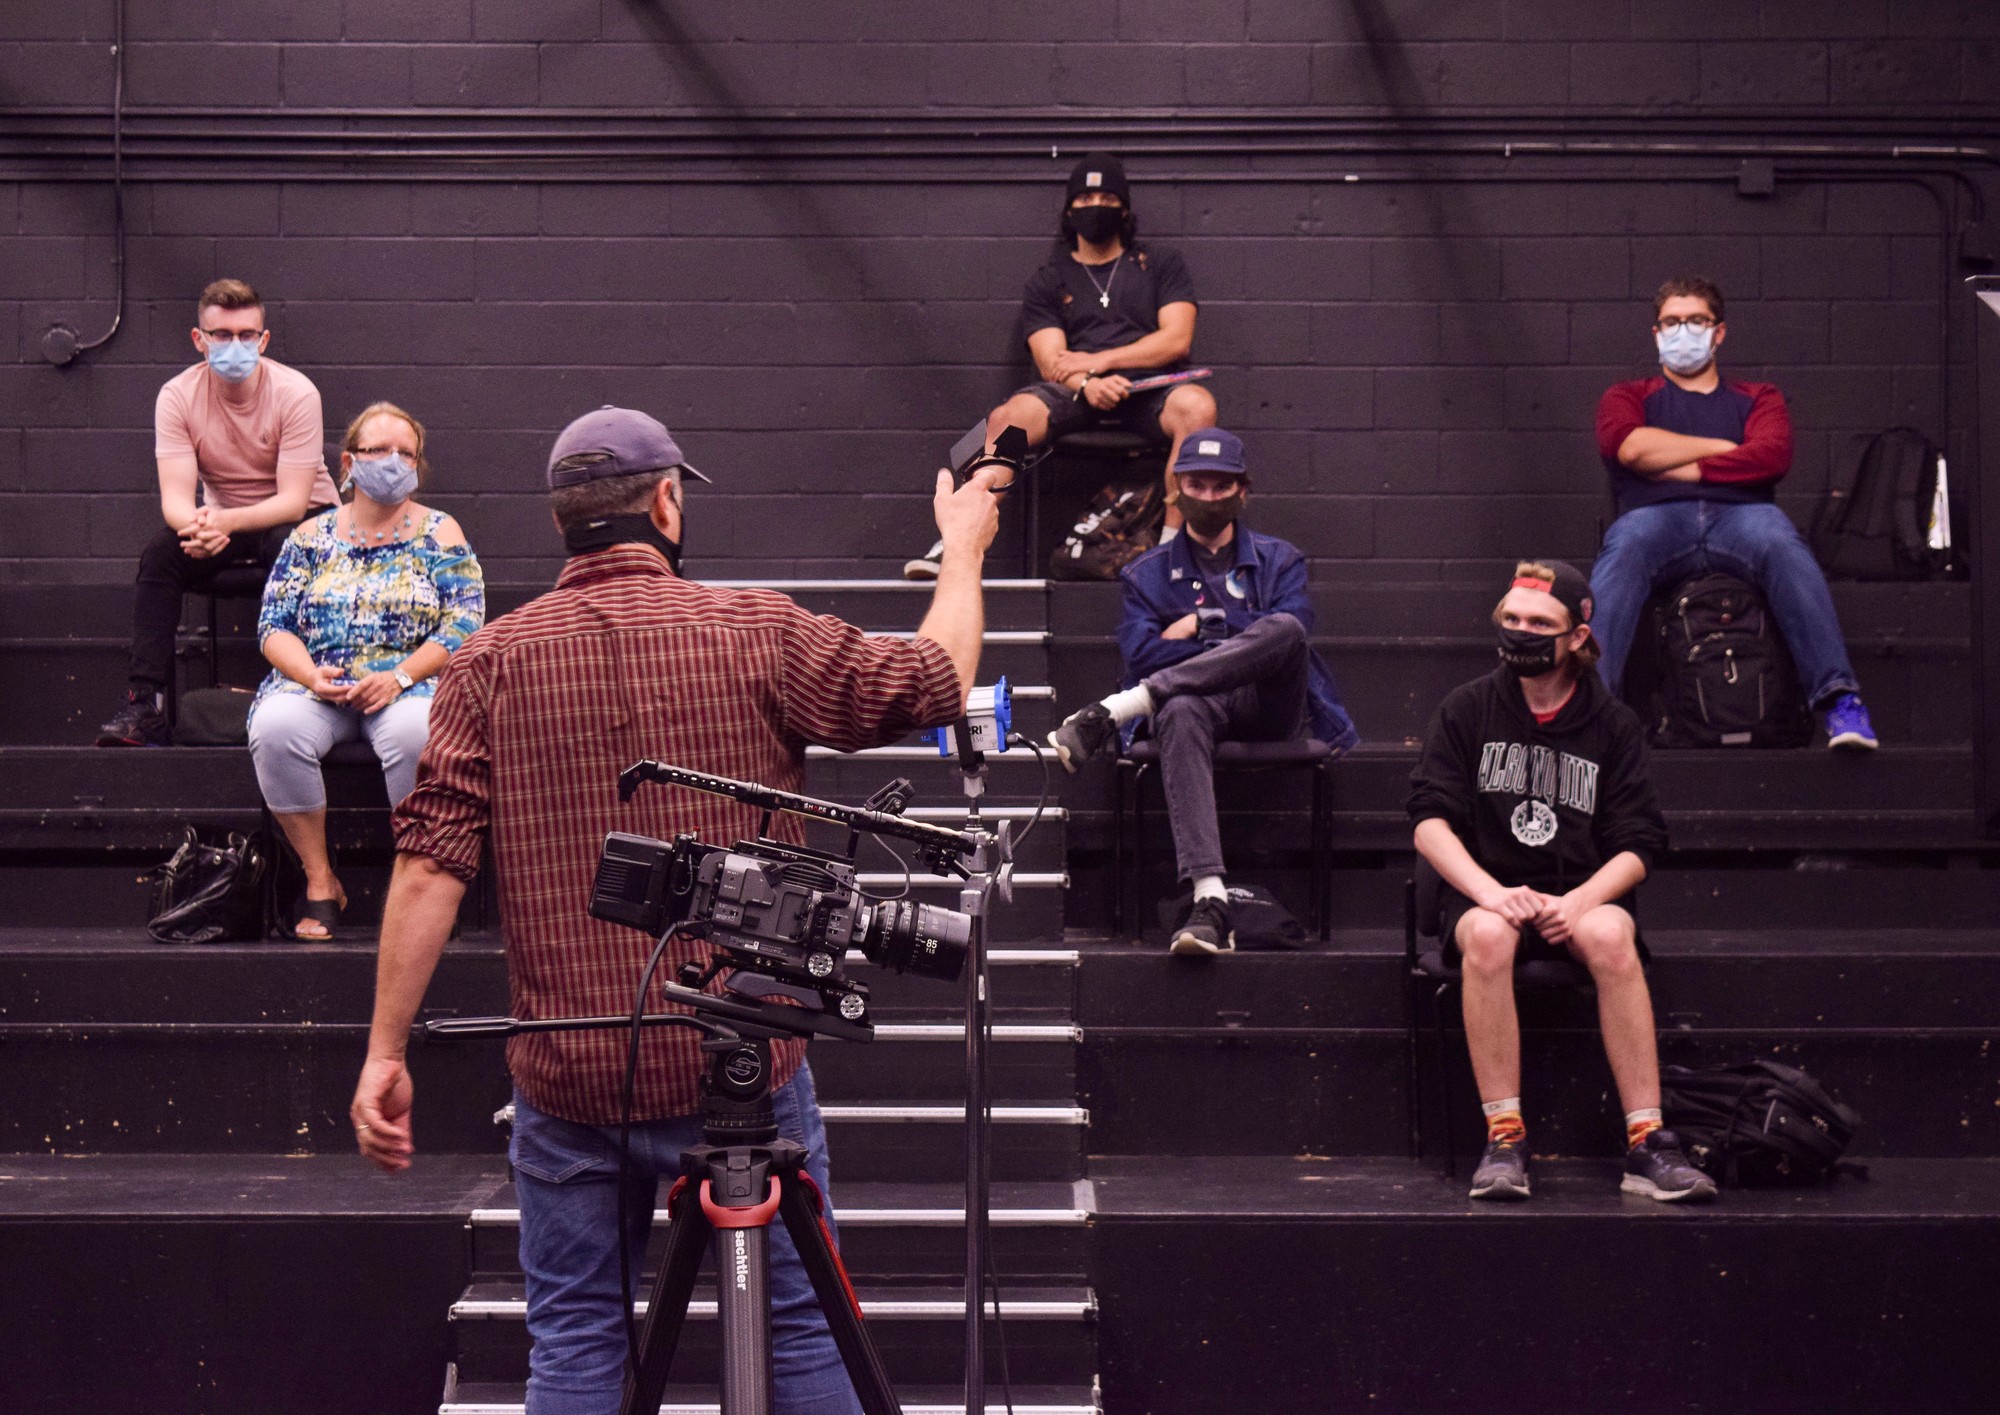 Karl Roeder teaches cinematography to students in the film and media production program.